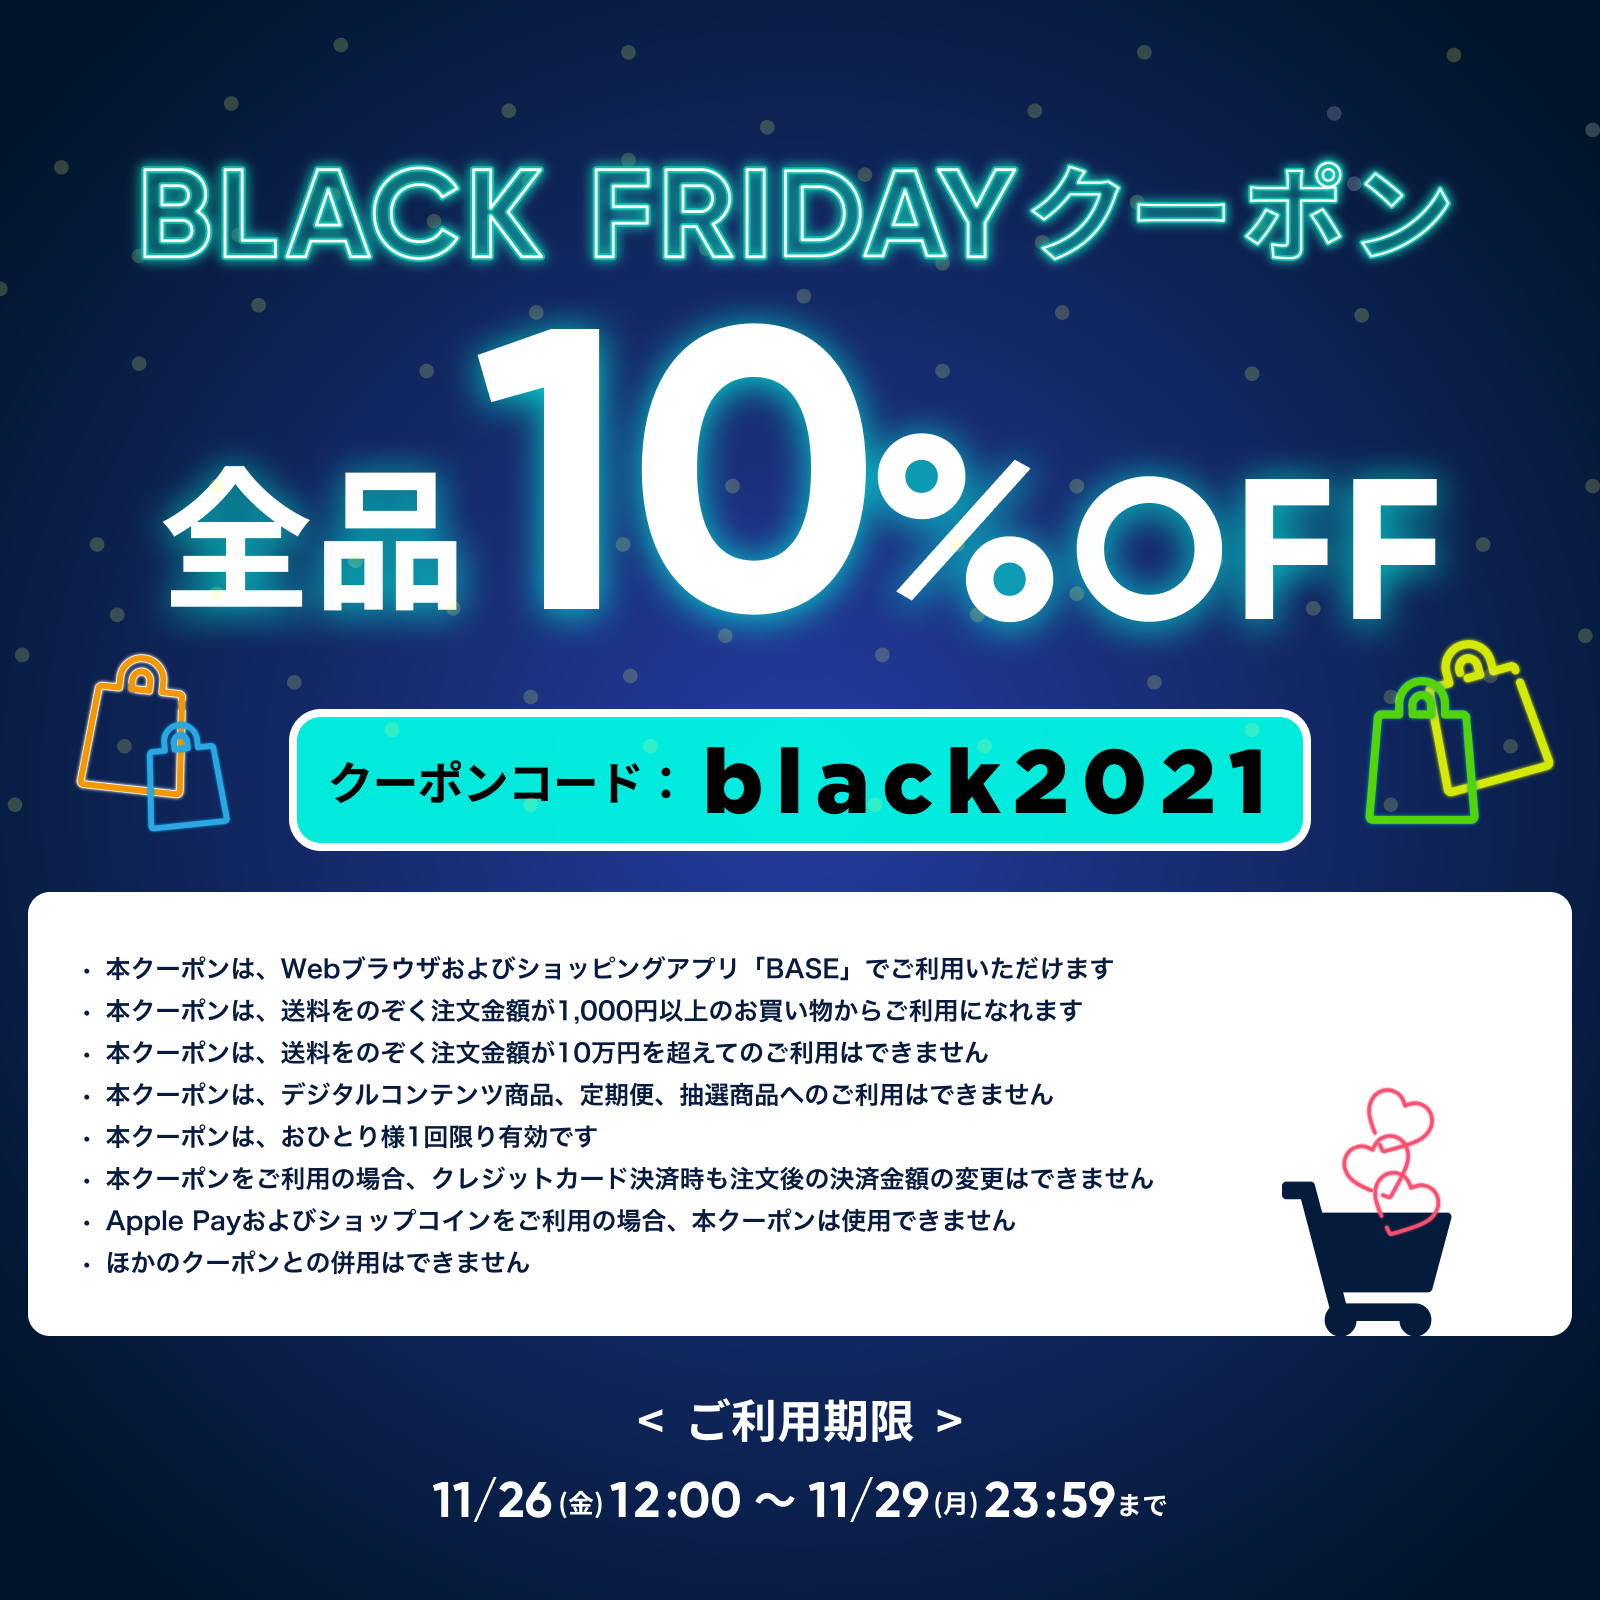 【BLACK FRIDAY SALE】10%OFF COUPON(11/26-29）